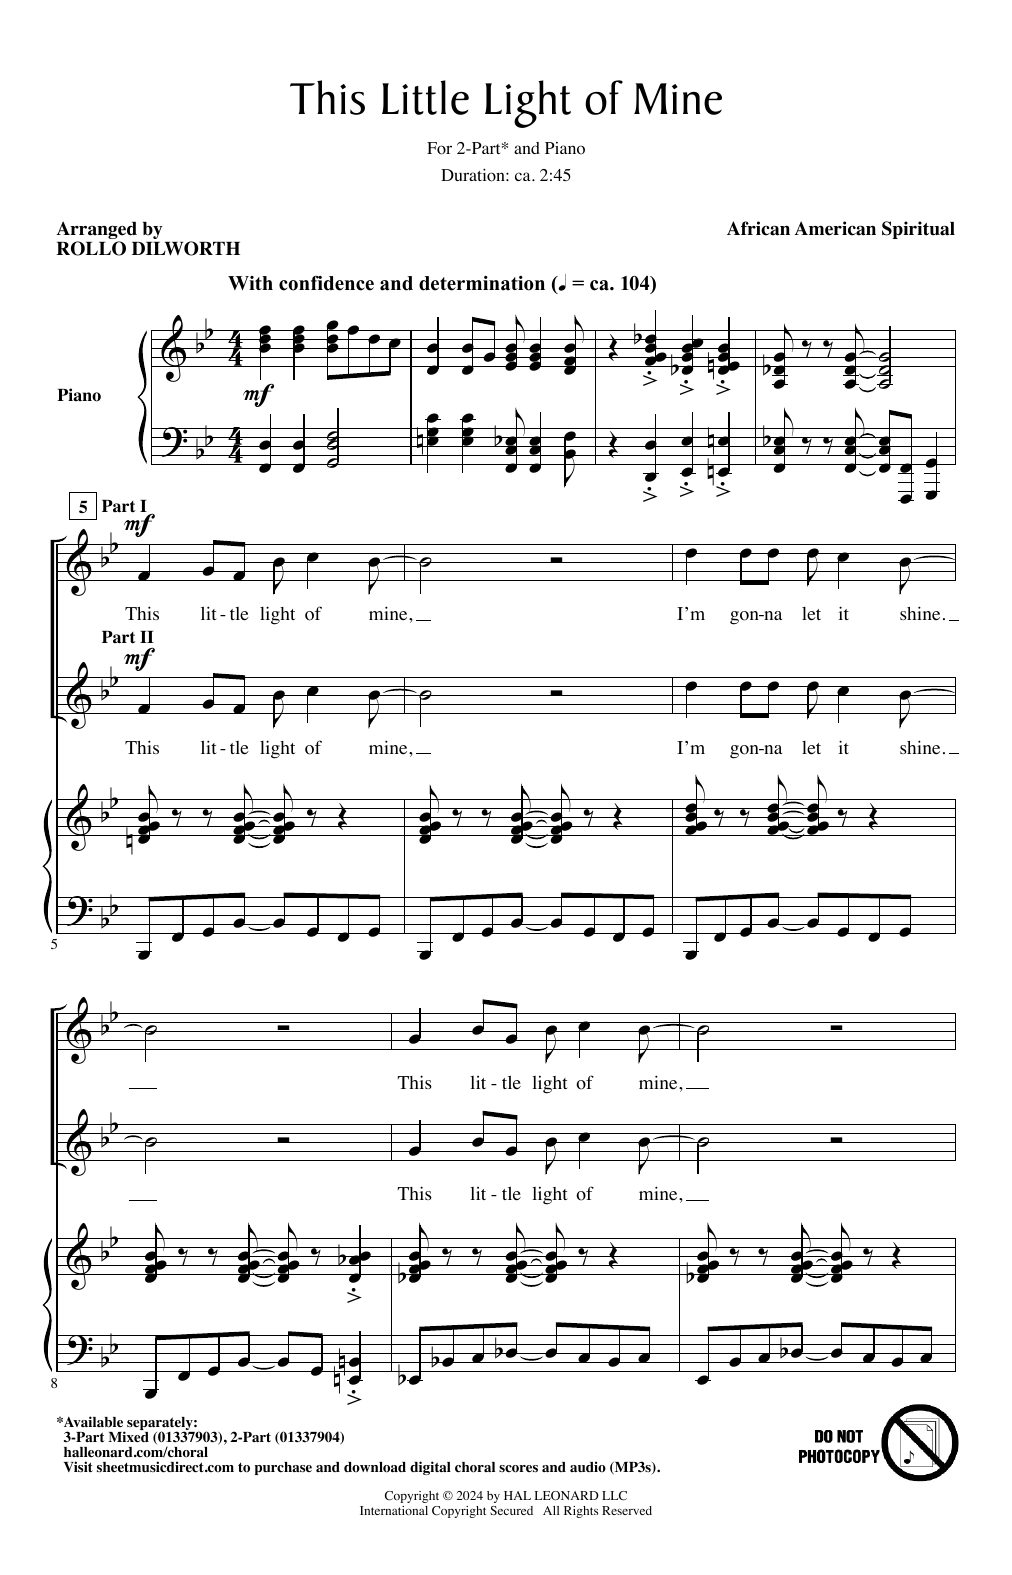 African-American Spiritual This Little Light Of Mine (arr. Rollo Dilworth) sheet music notes printable PDF score